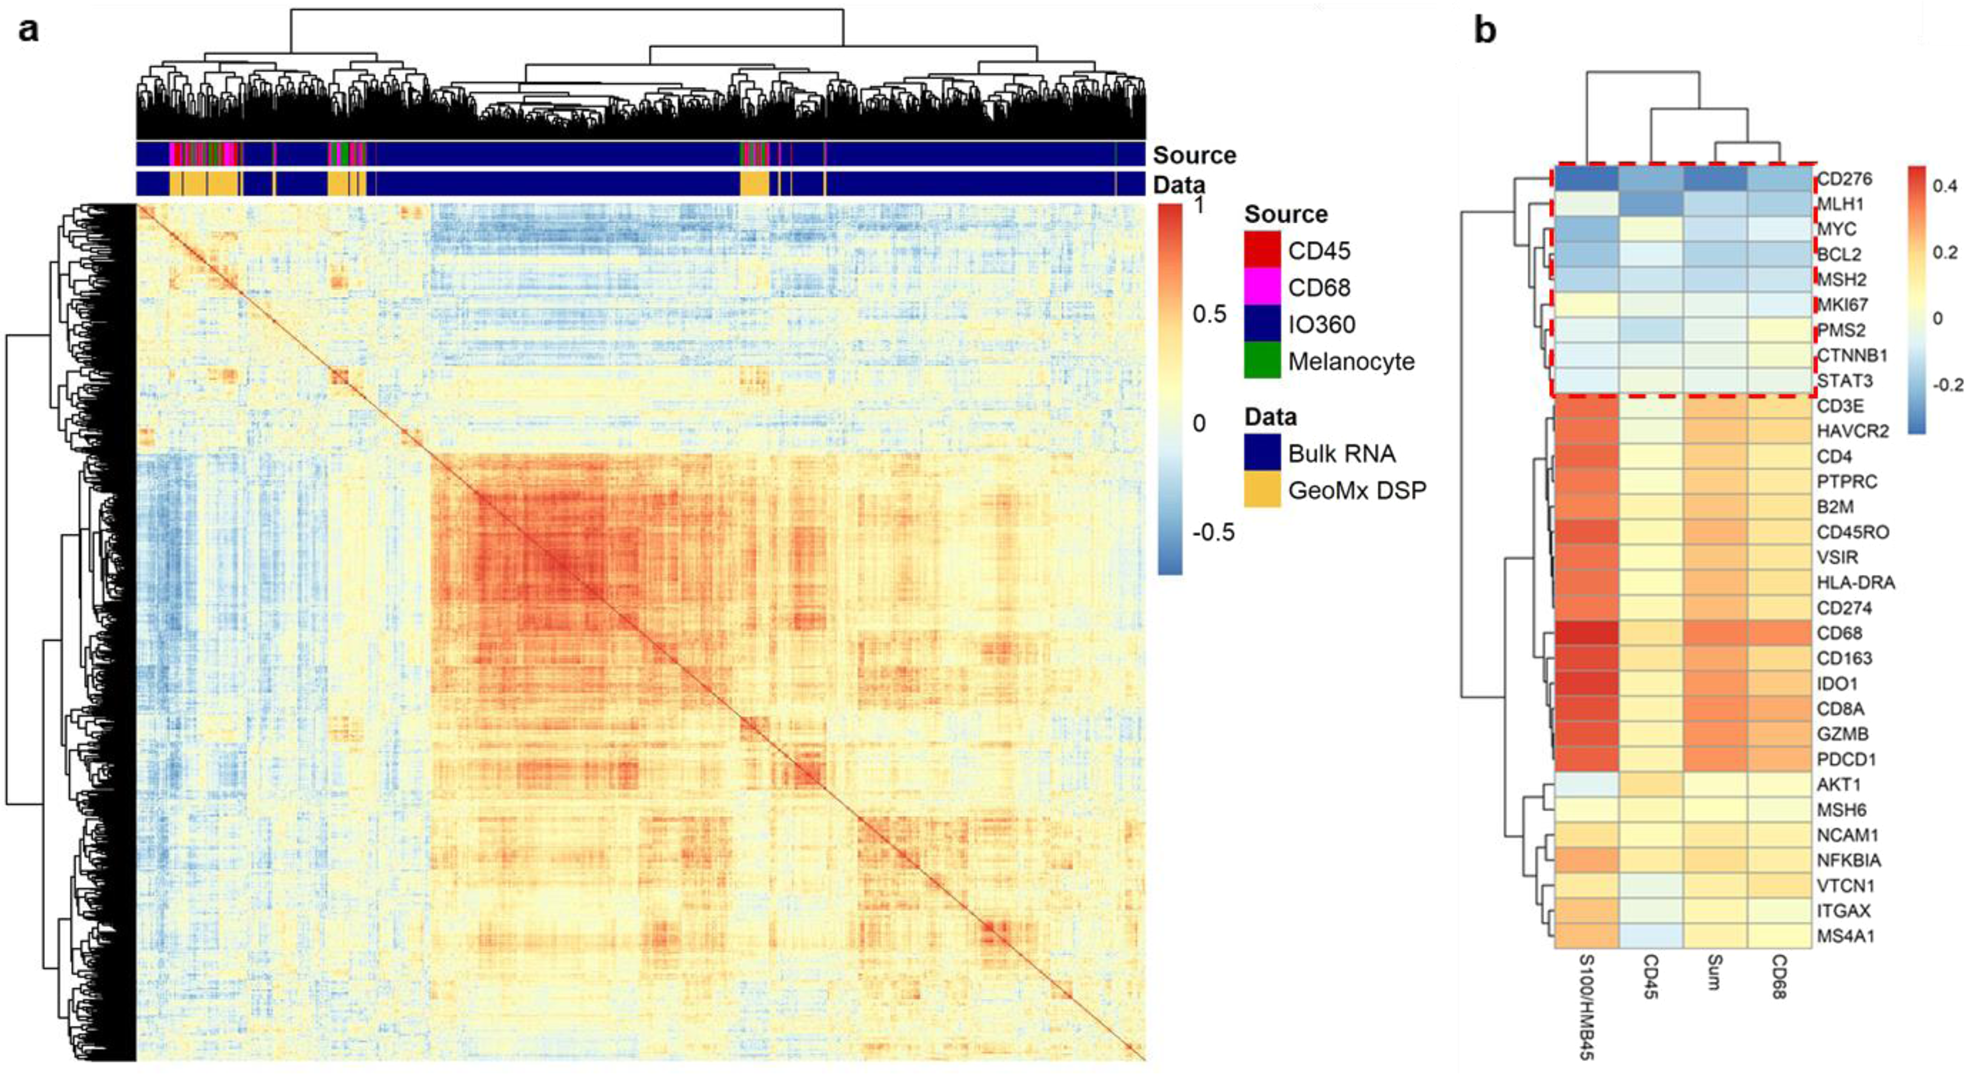 Models that combine transcriptomic with spatial protein information exceed  the predictive value for either single modality | npj Precision Oncology